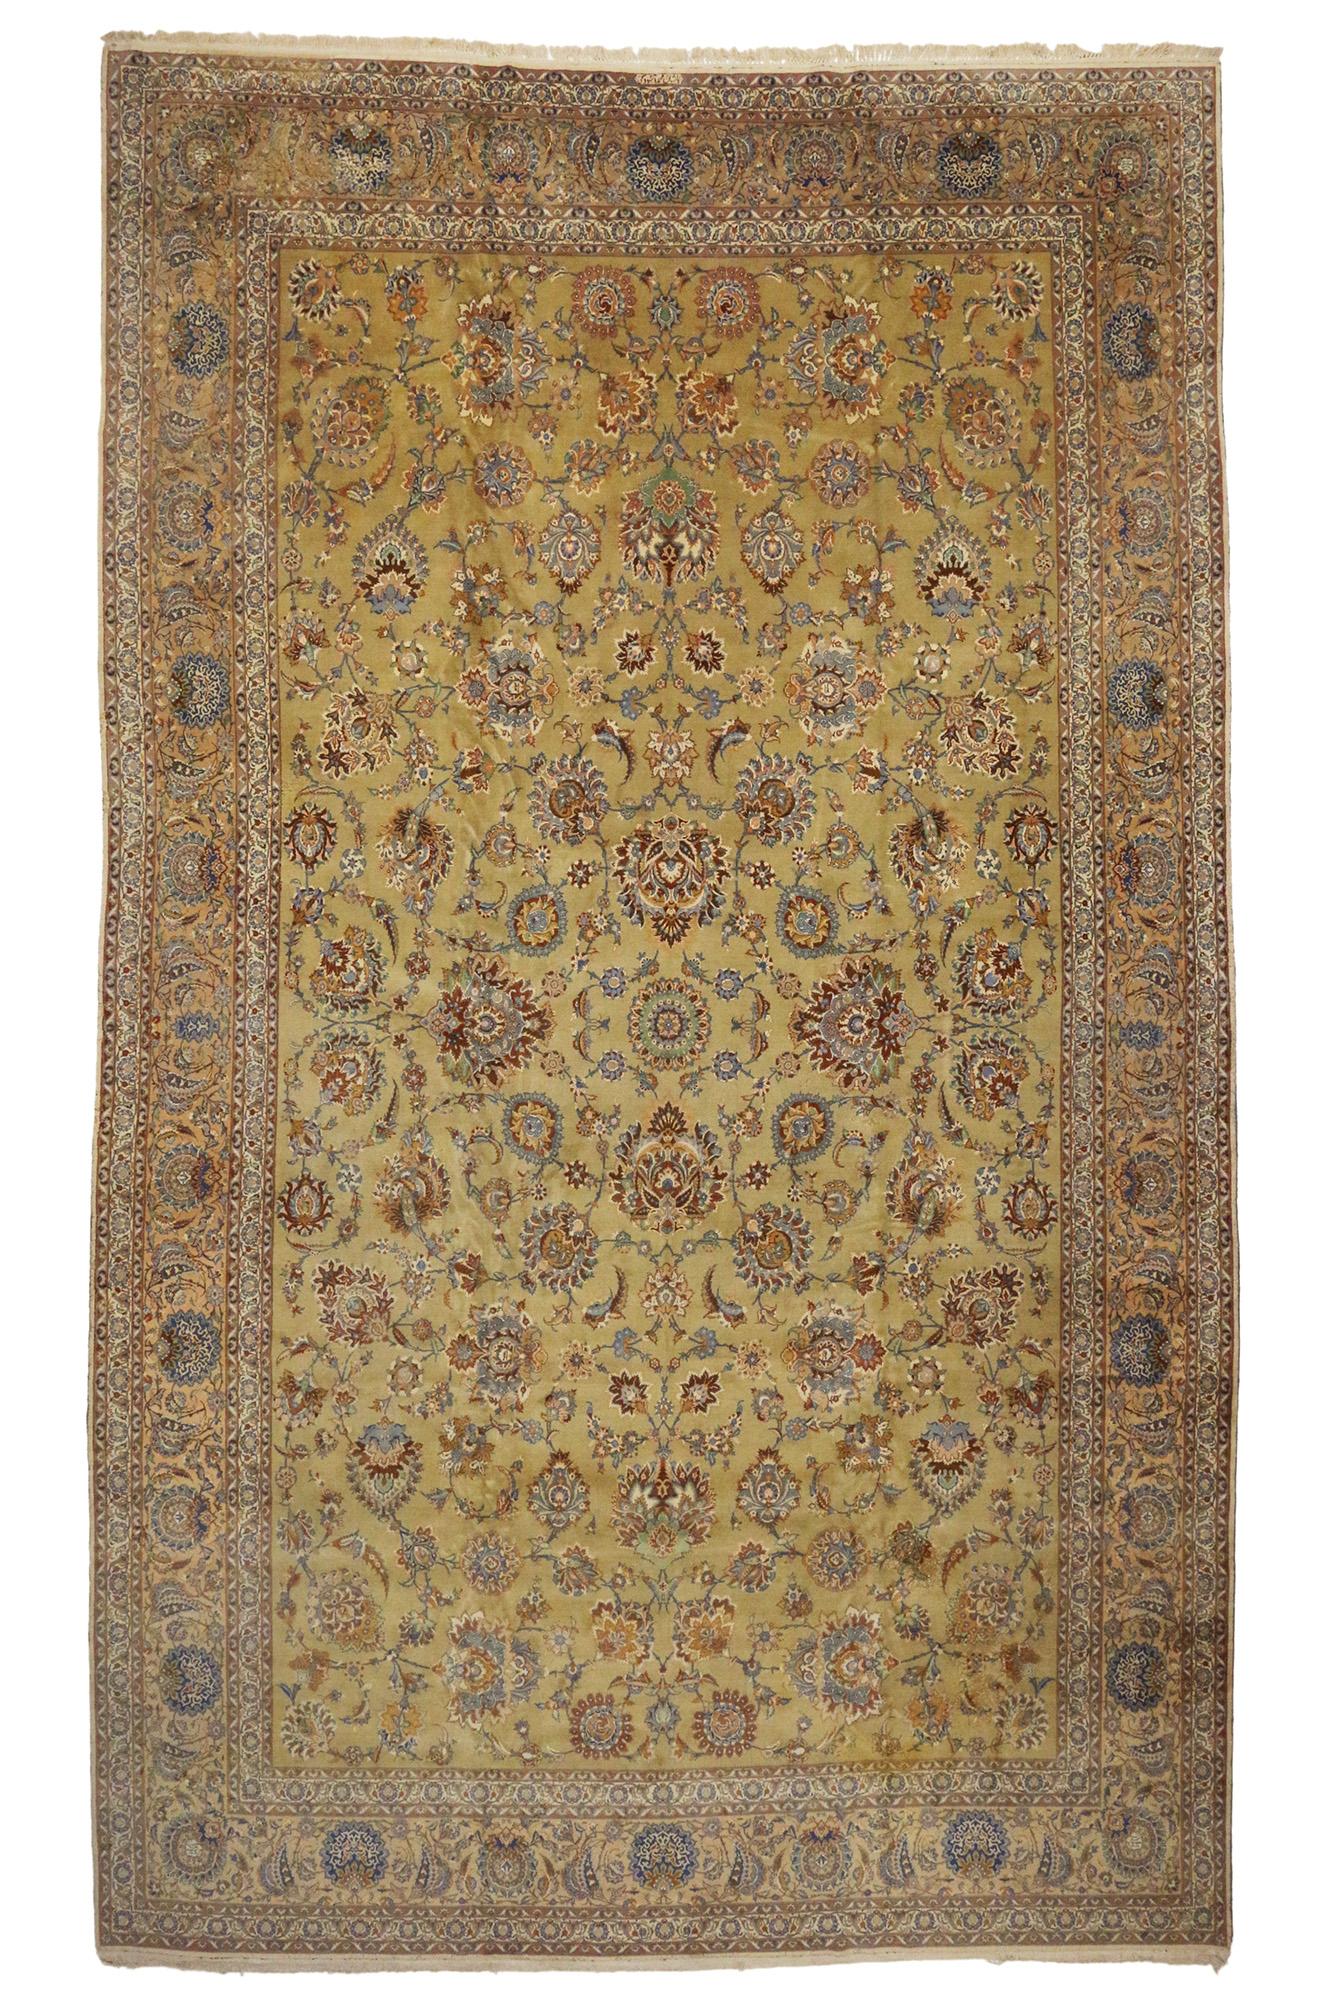 1880s Antique Persian Kashan Rug, Biophilic Design Meets Earth-Tone Elegance In Good Condition For Sale In Dallas, TX